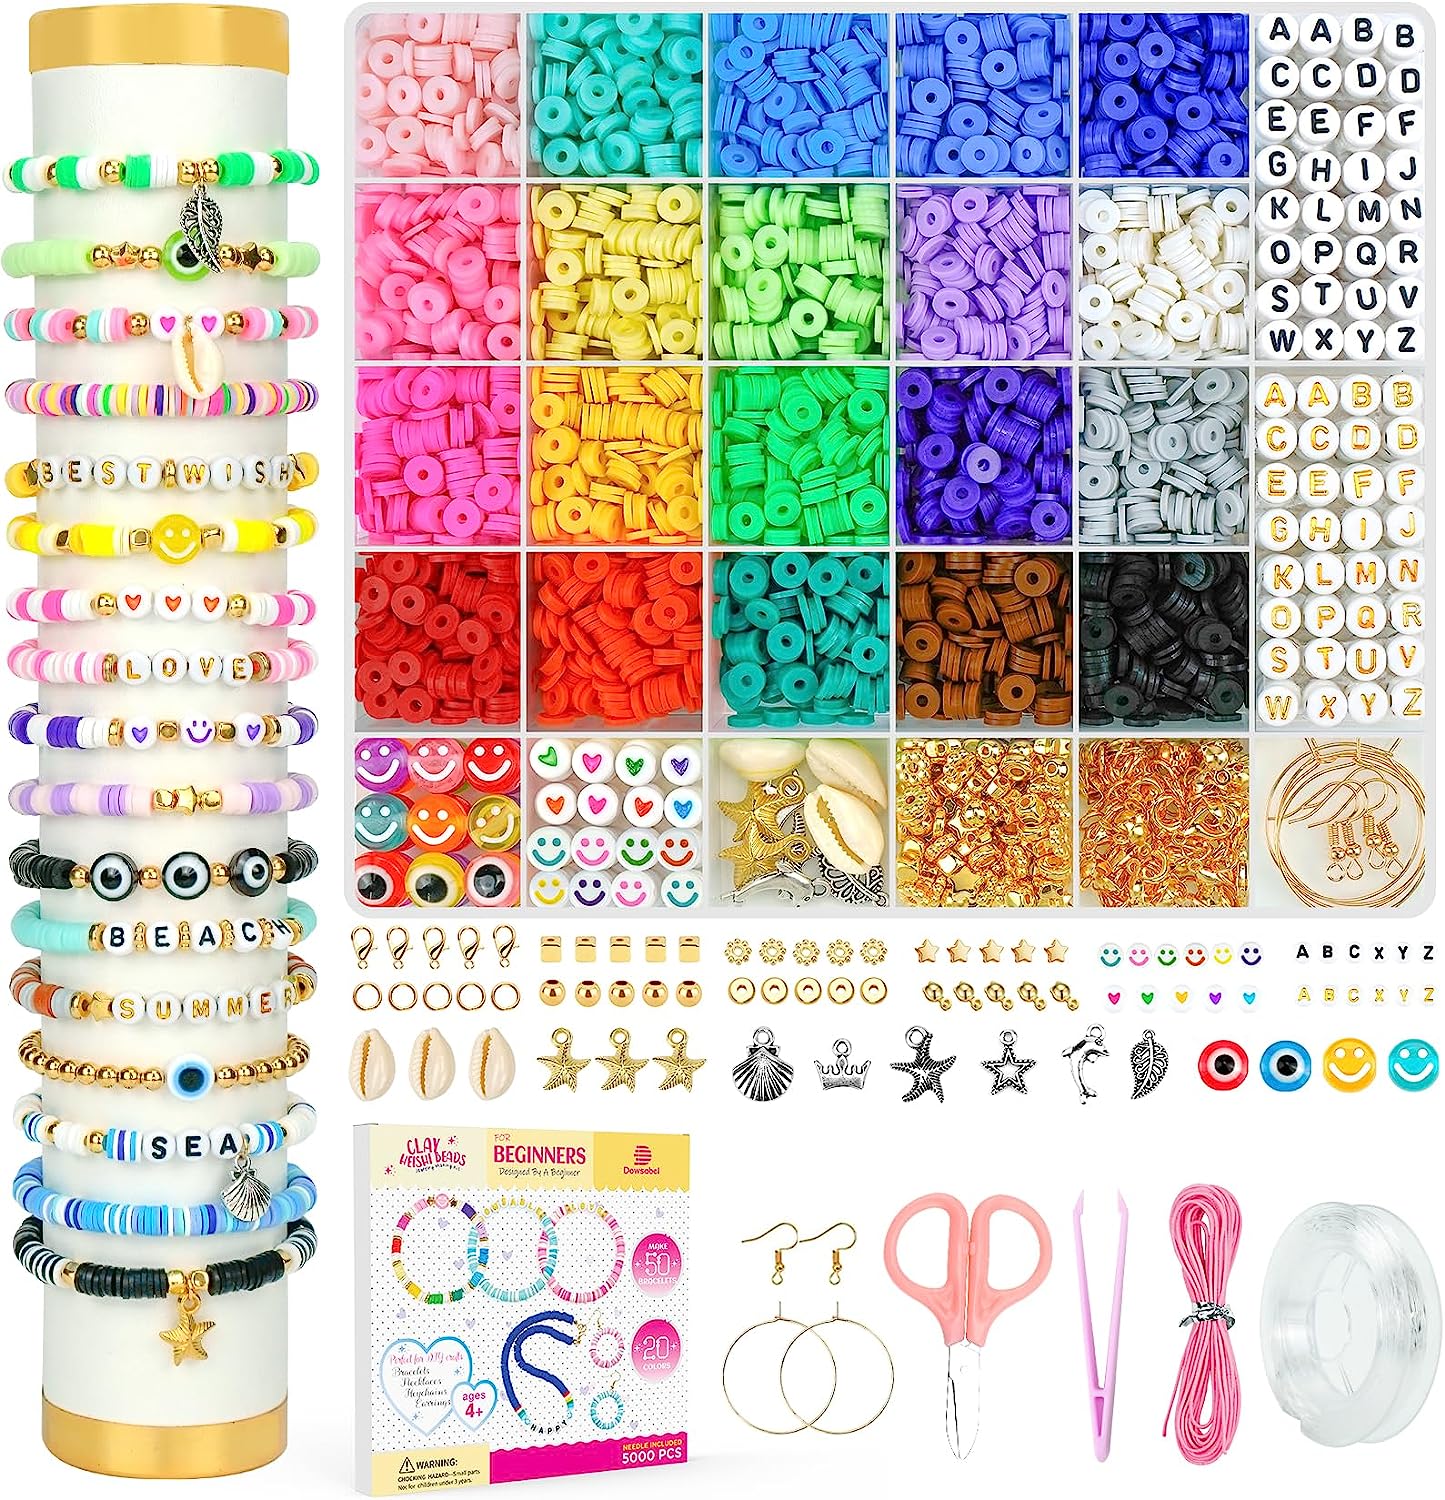 Peirich peirich friendship bracelets making kit, includes 44 colors  embroidery floss with storage box with threads, bracelets letter